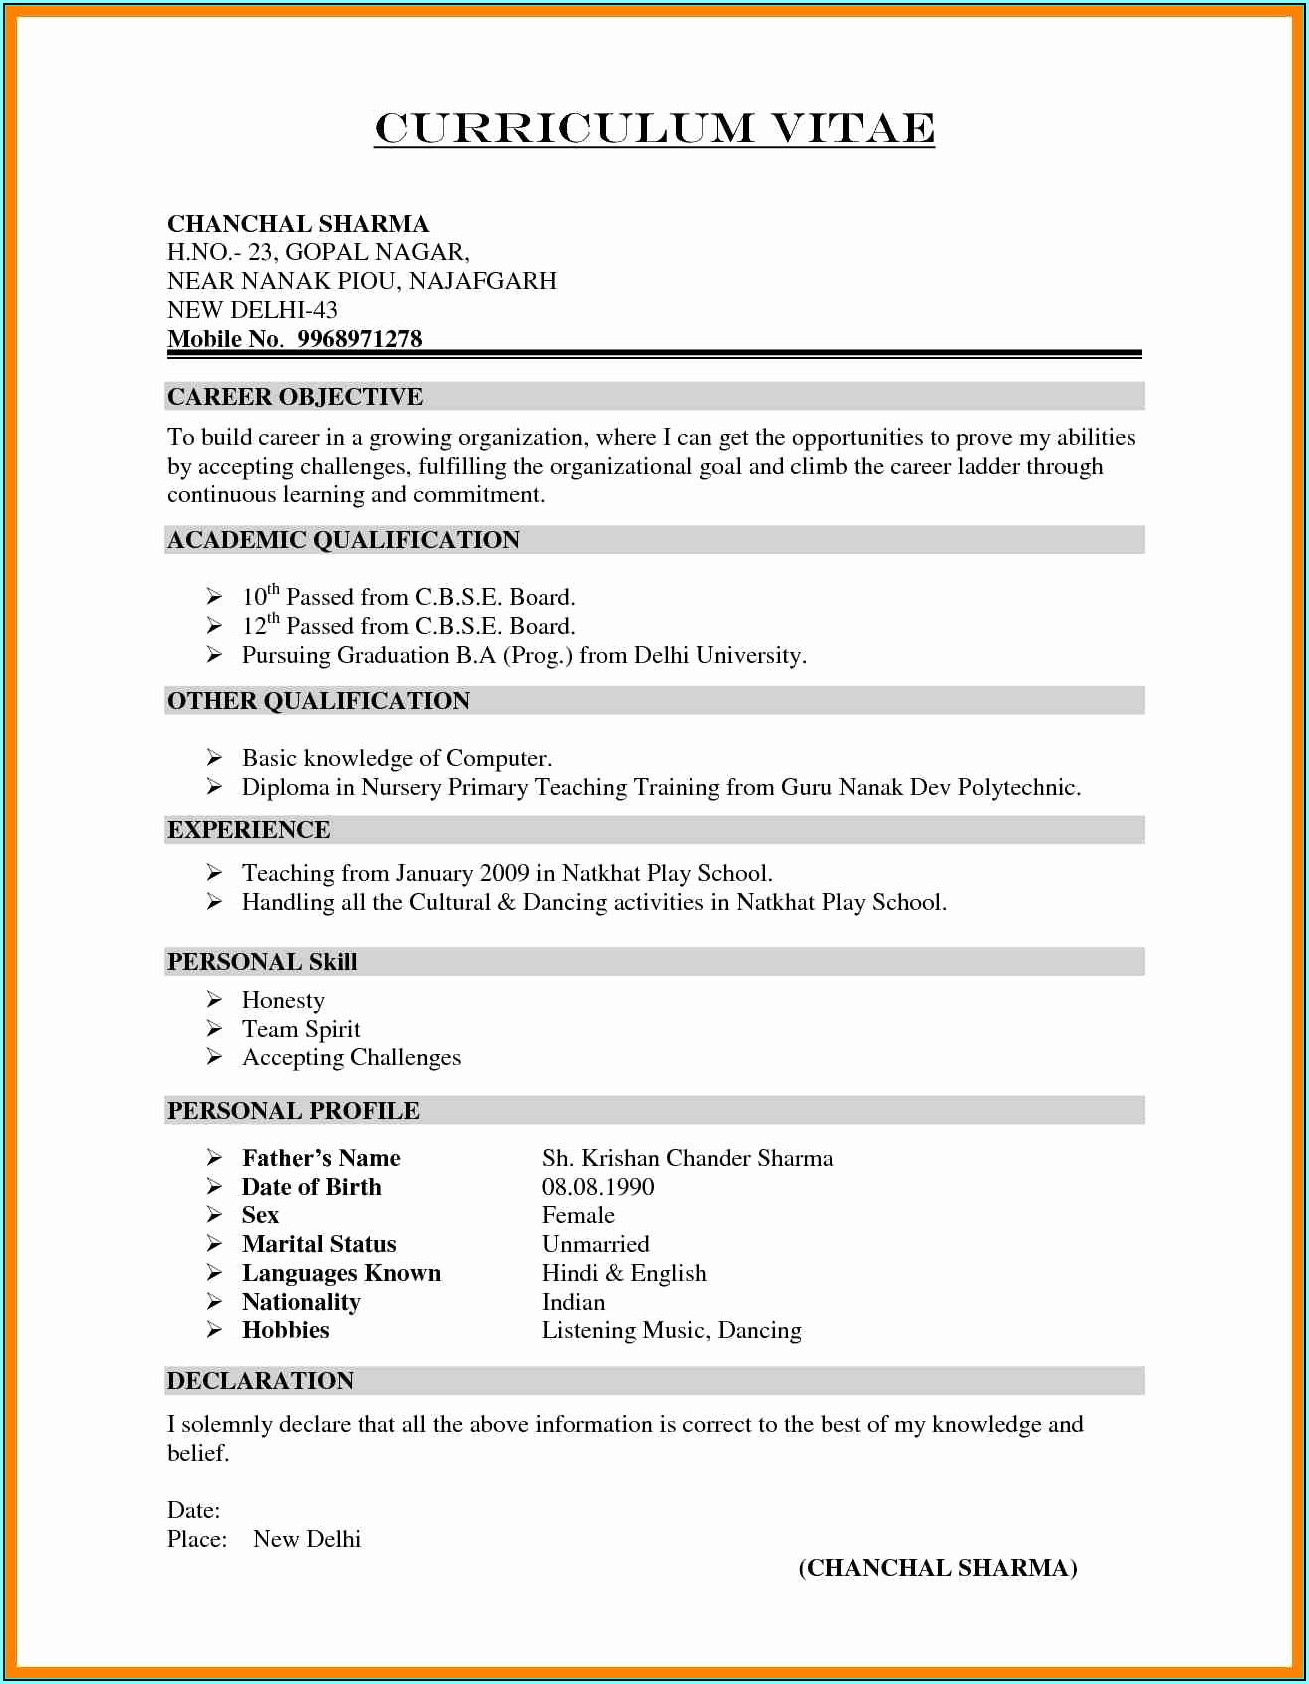 Resume Format Download In Ms Word For Fresher Civil Engineer